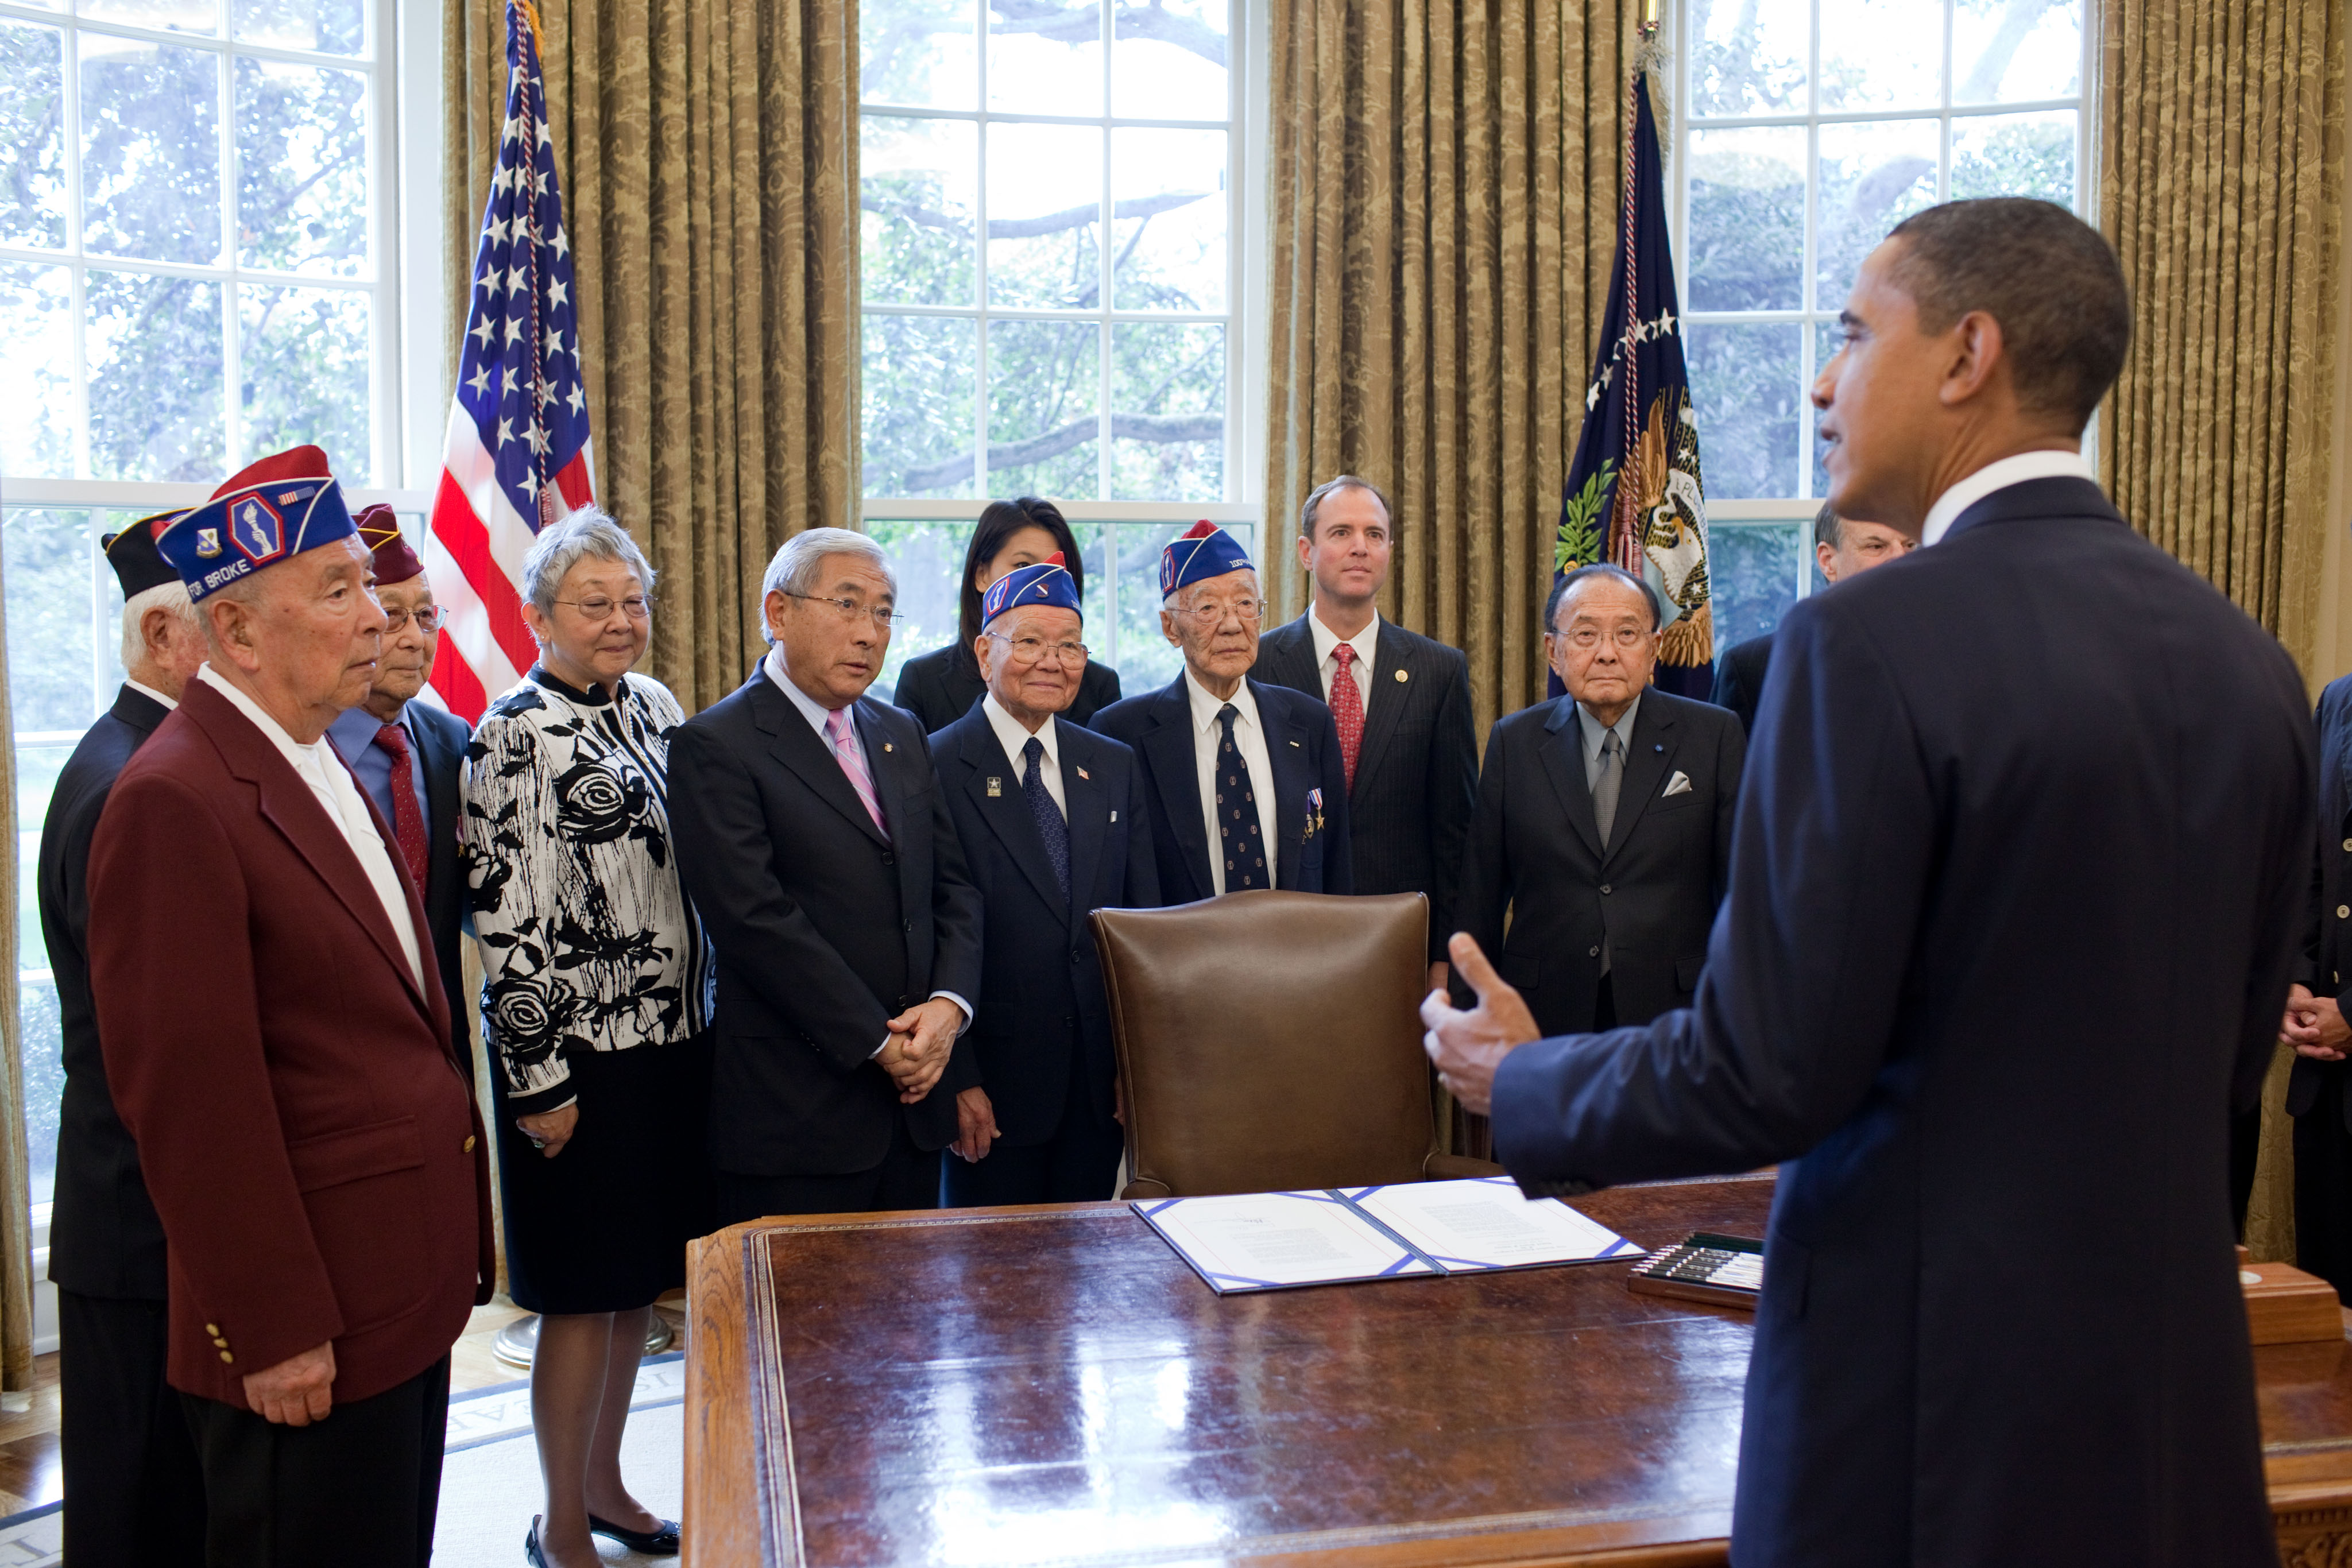 President Obama Speaks to Veterans Before Signing Bill Granting Congressional Gold Medal to the 100th Infantry Battalion and the 442nd Regimental Combat Team